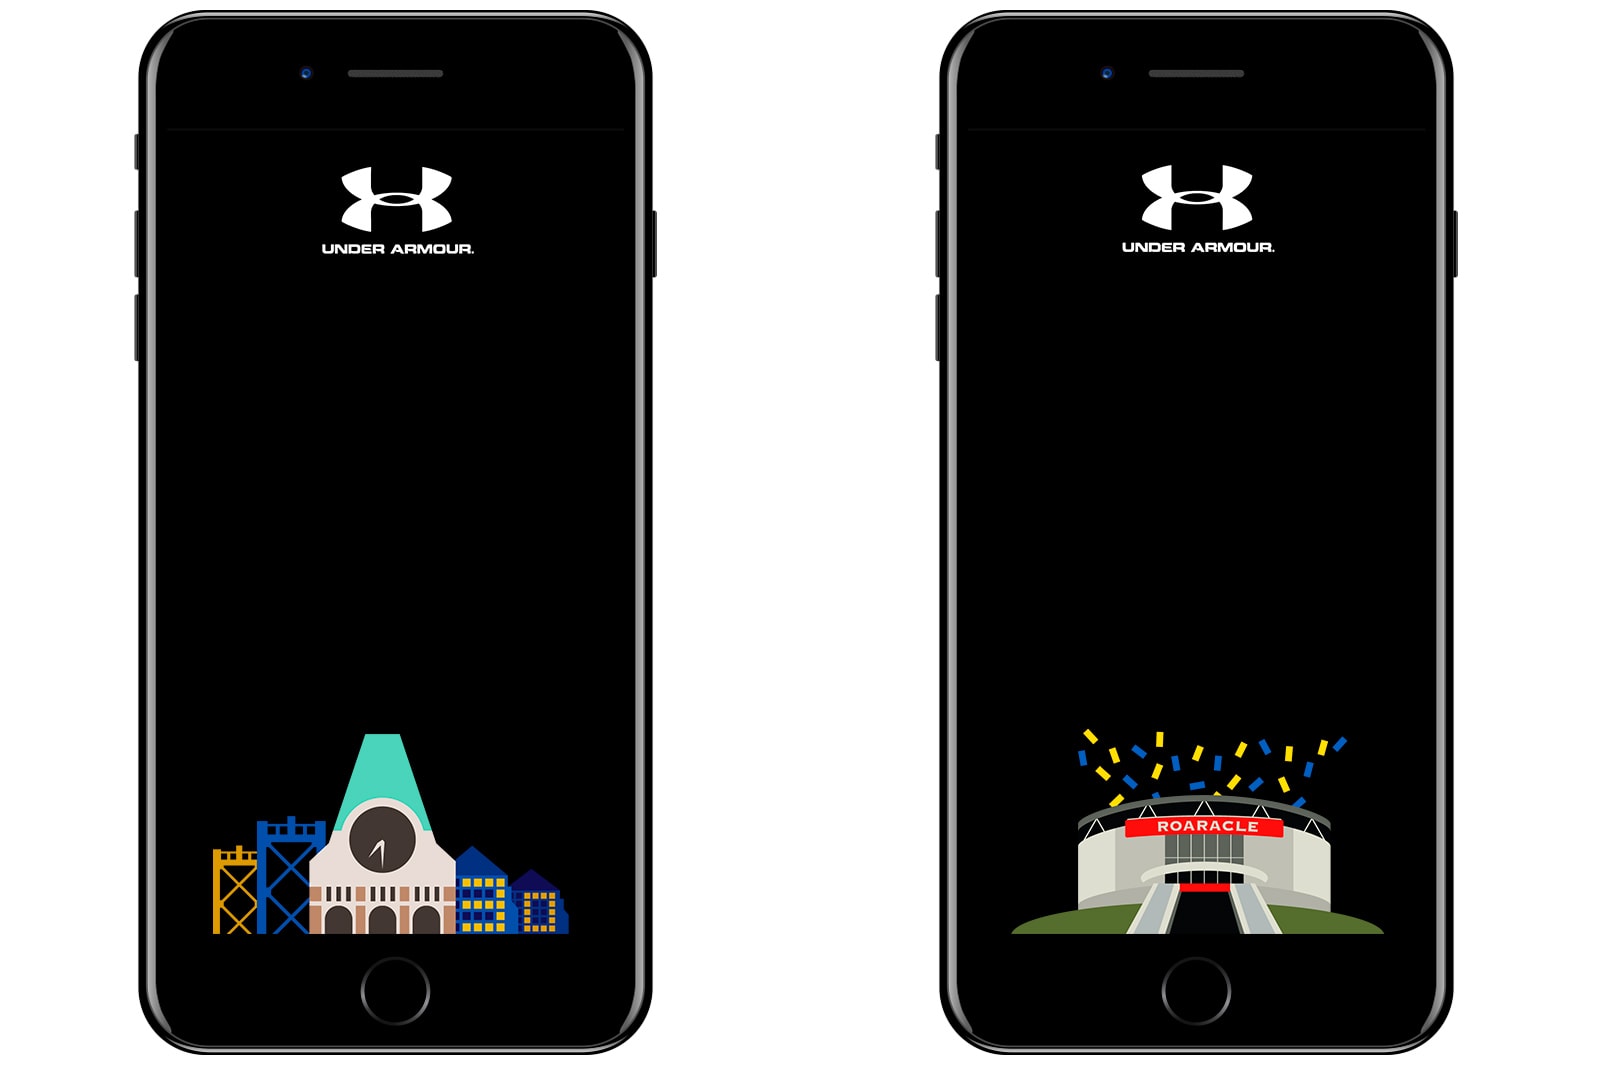 Under Armour Golden State Warriors Snapchat Filters 2017 CCA design students